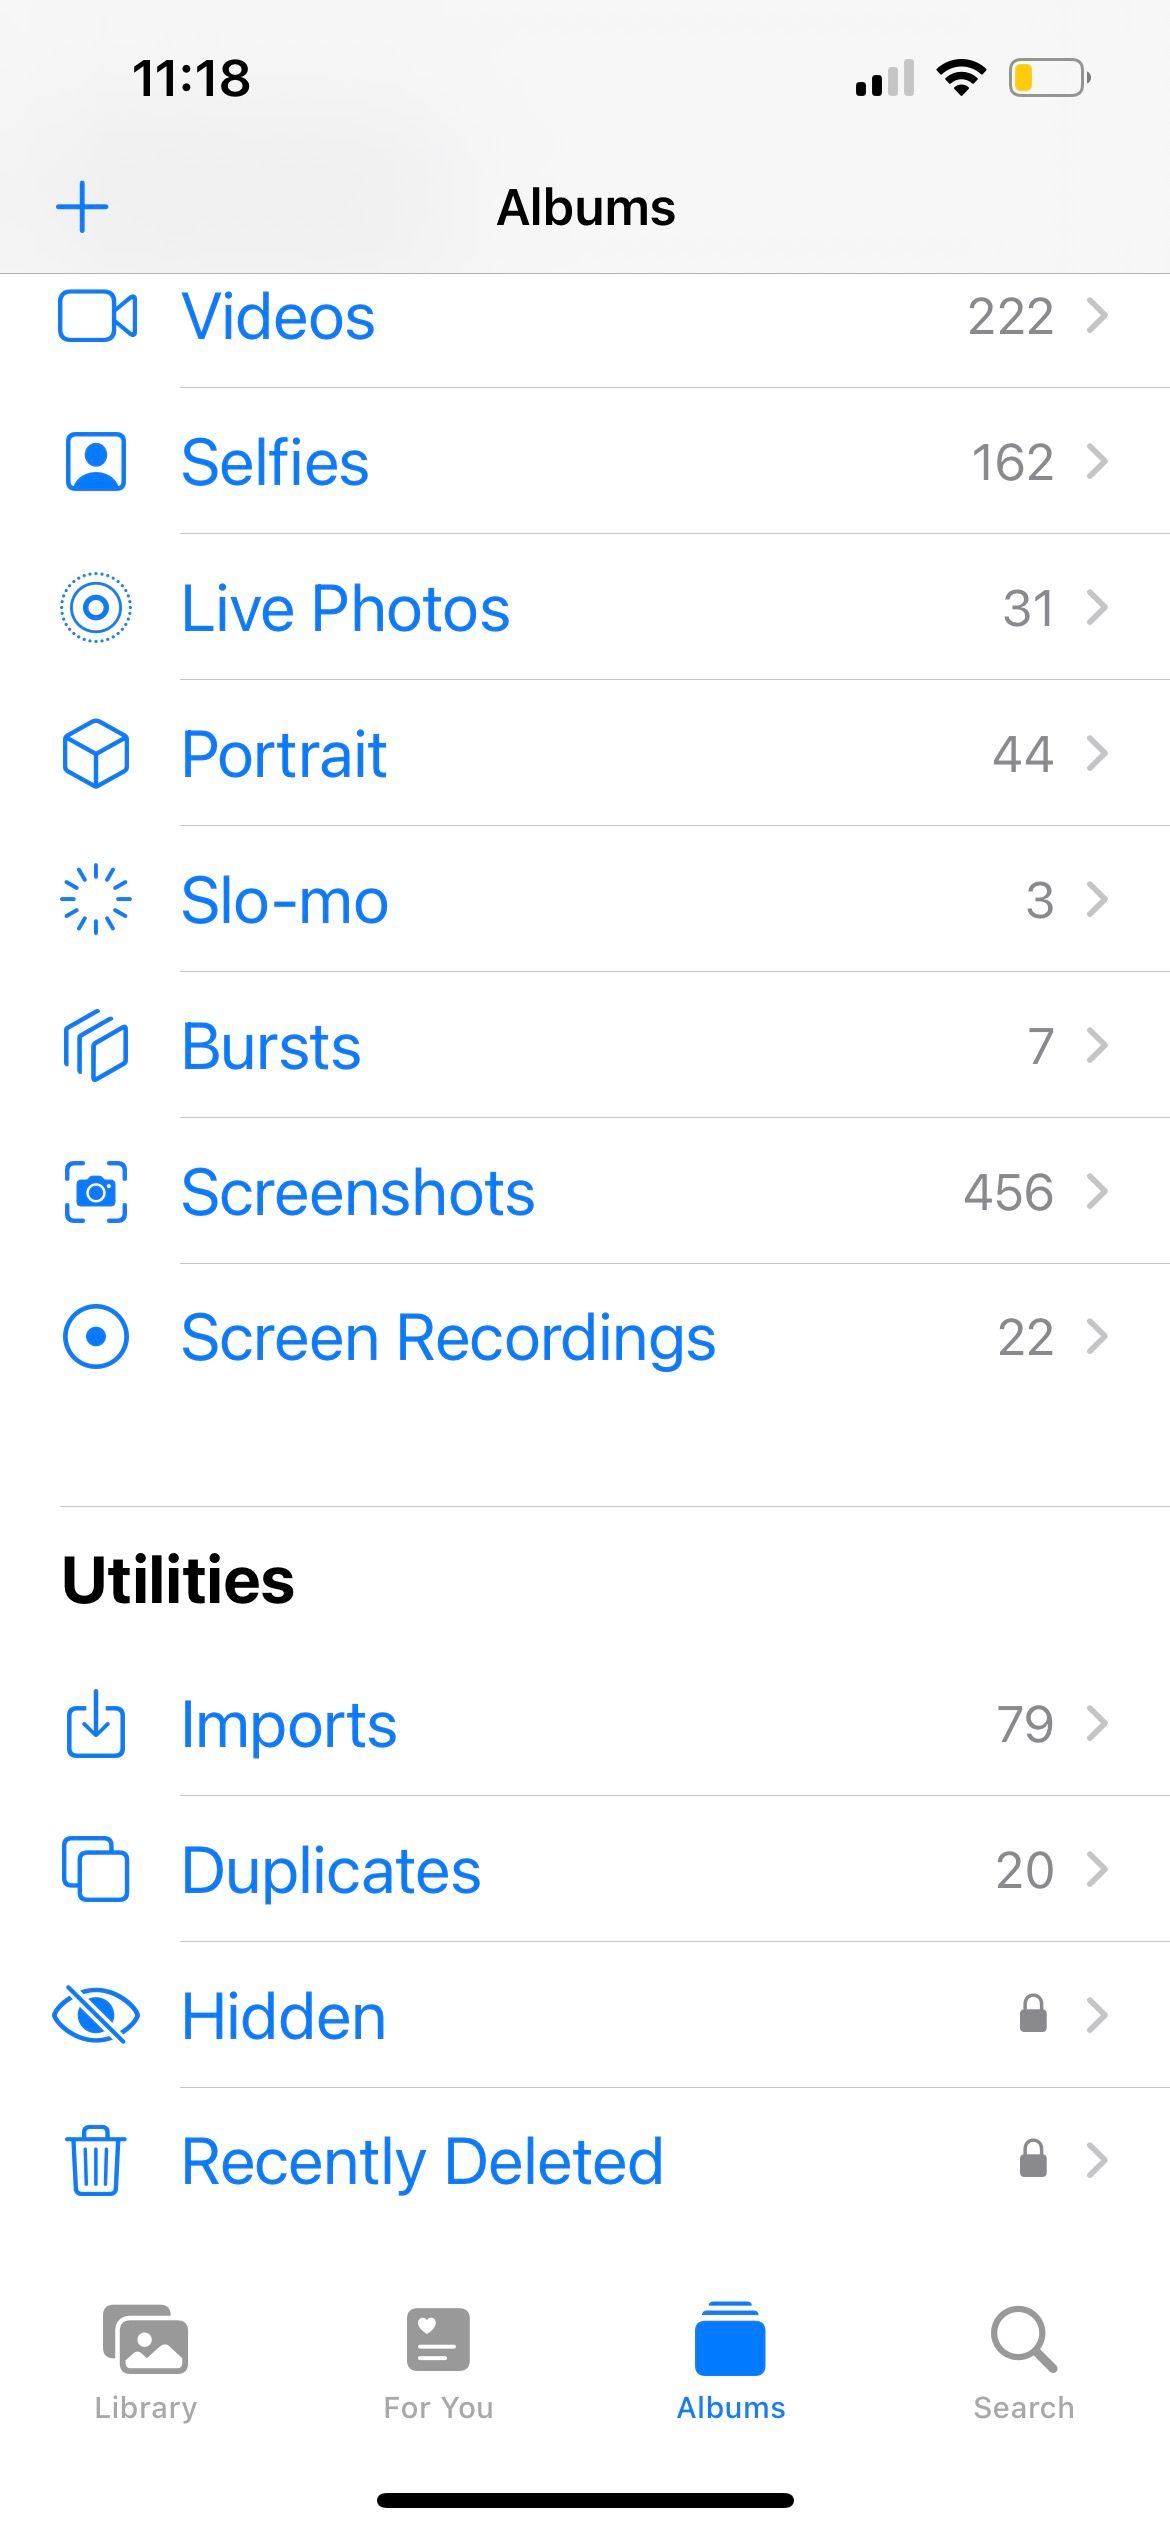 iphone albums tab showing utilities section